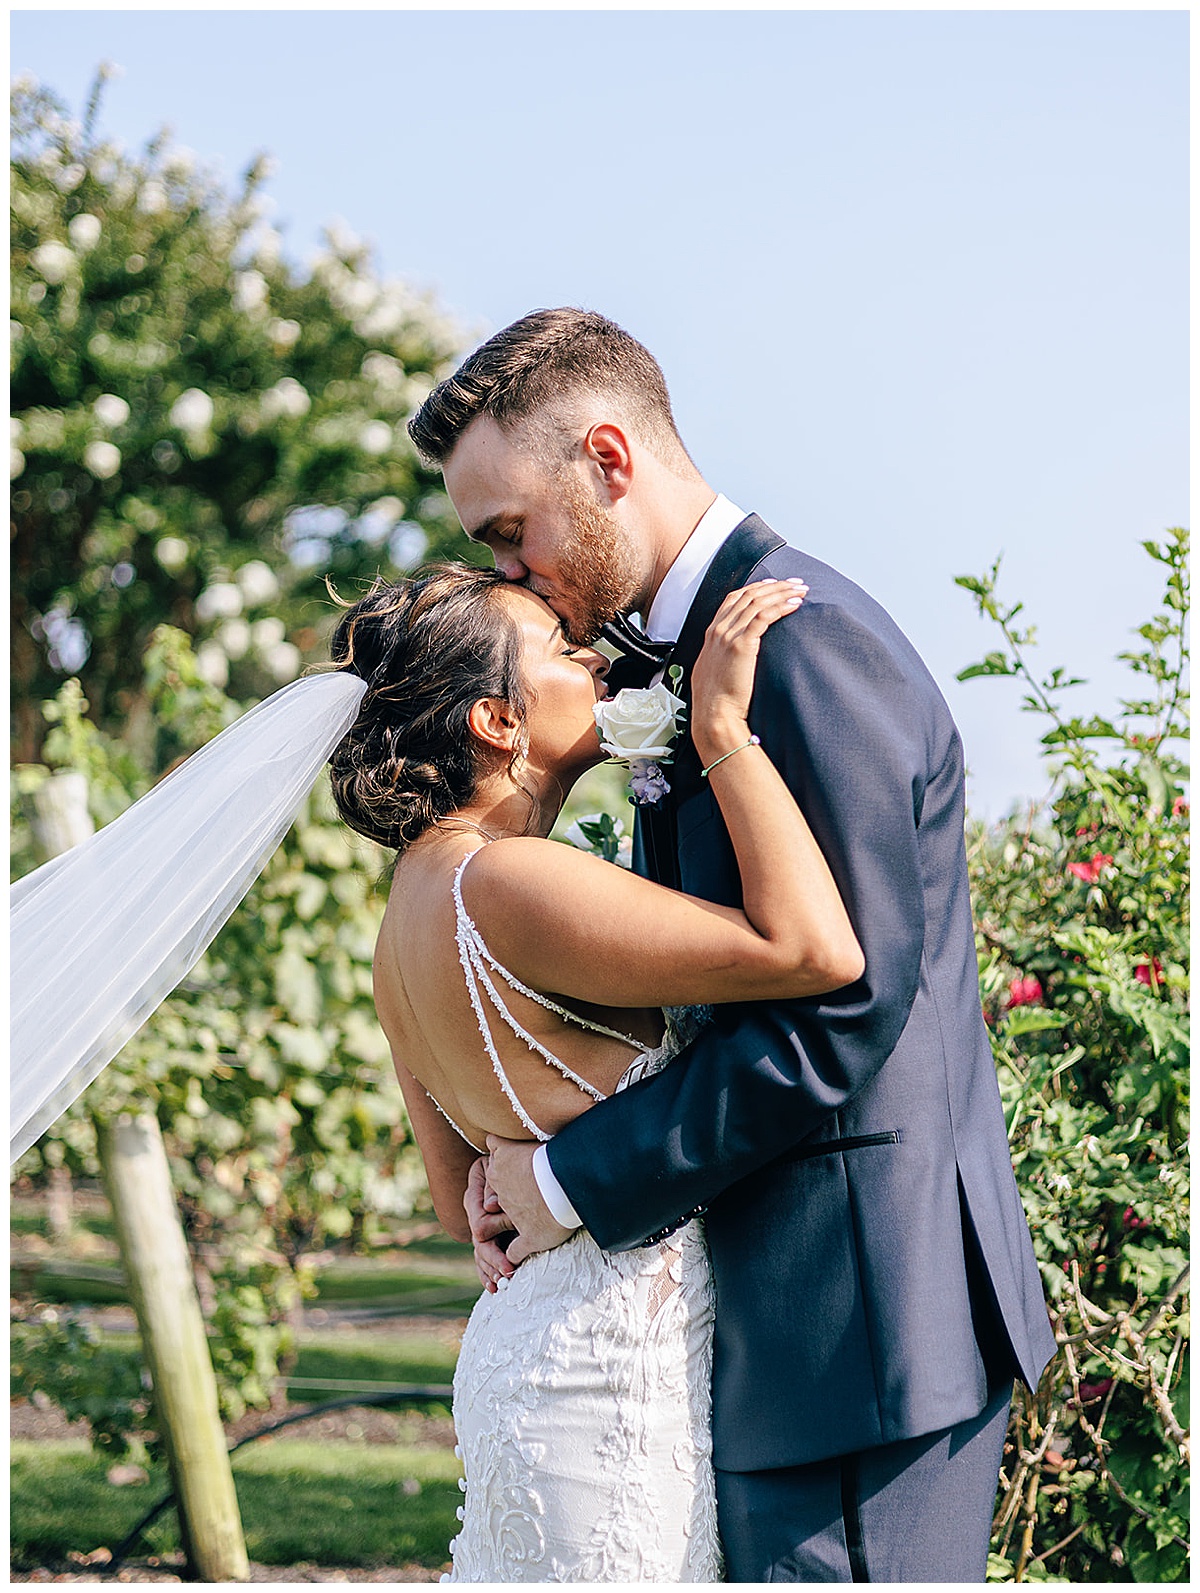 Couple share a tender moment for Kayla Bouren Photography